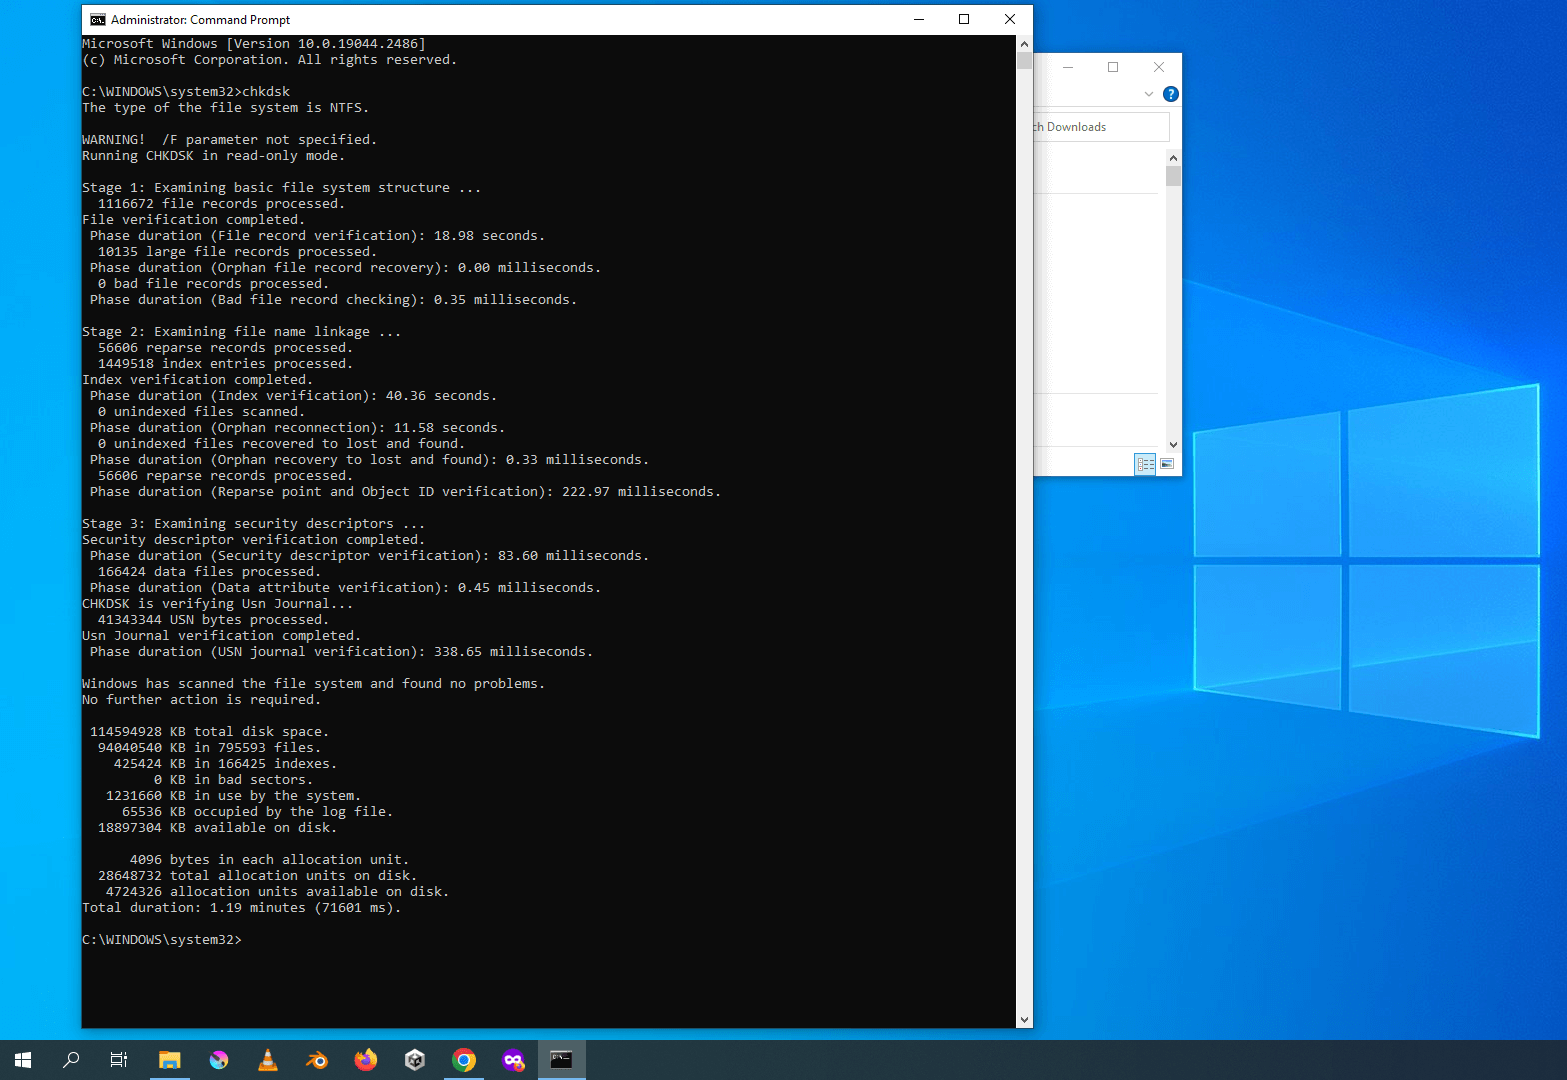 windows-command-prompt-with-chkdsk-utility-running